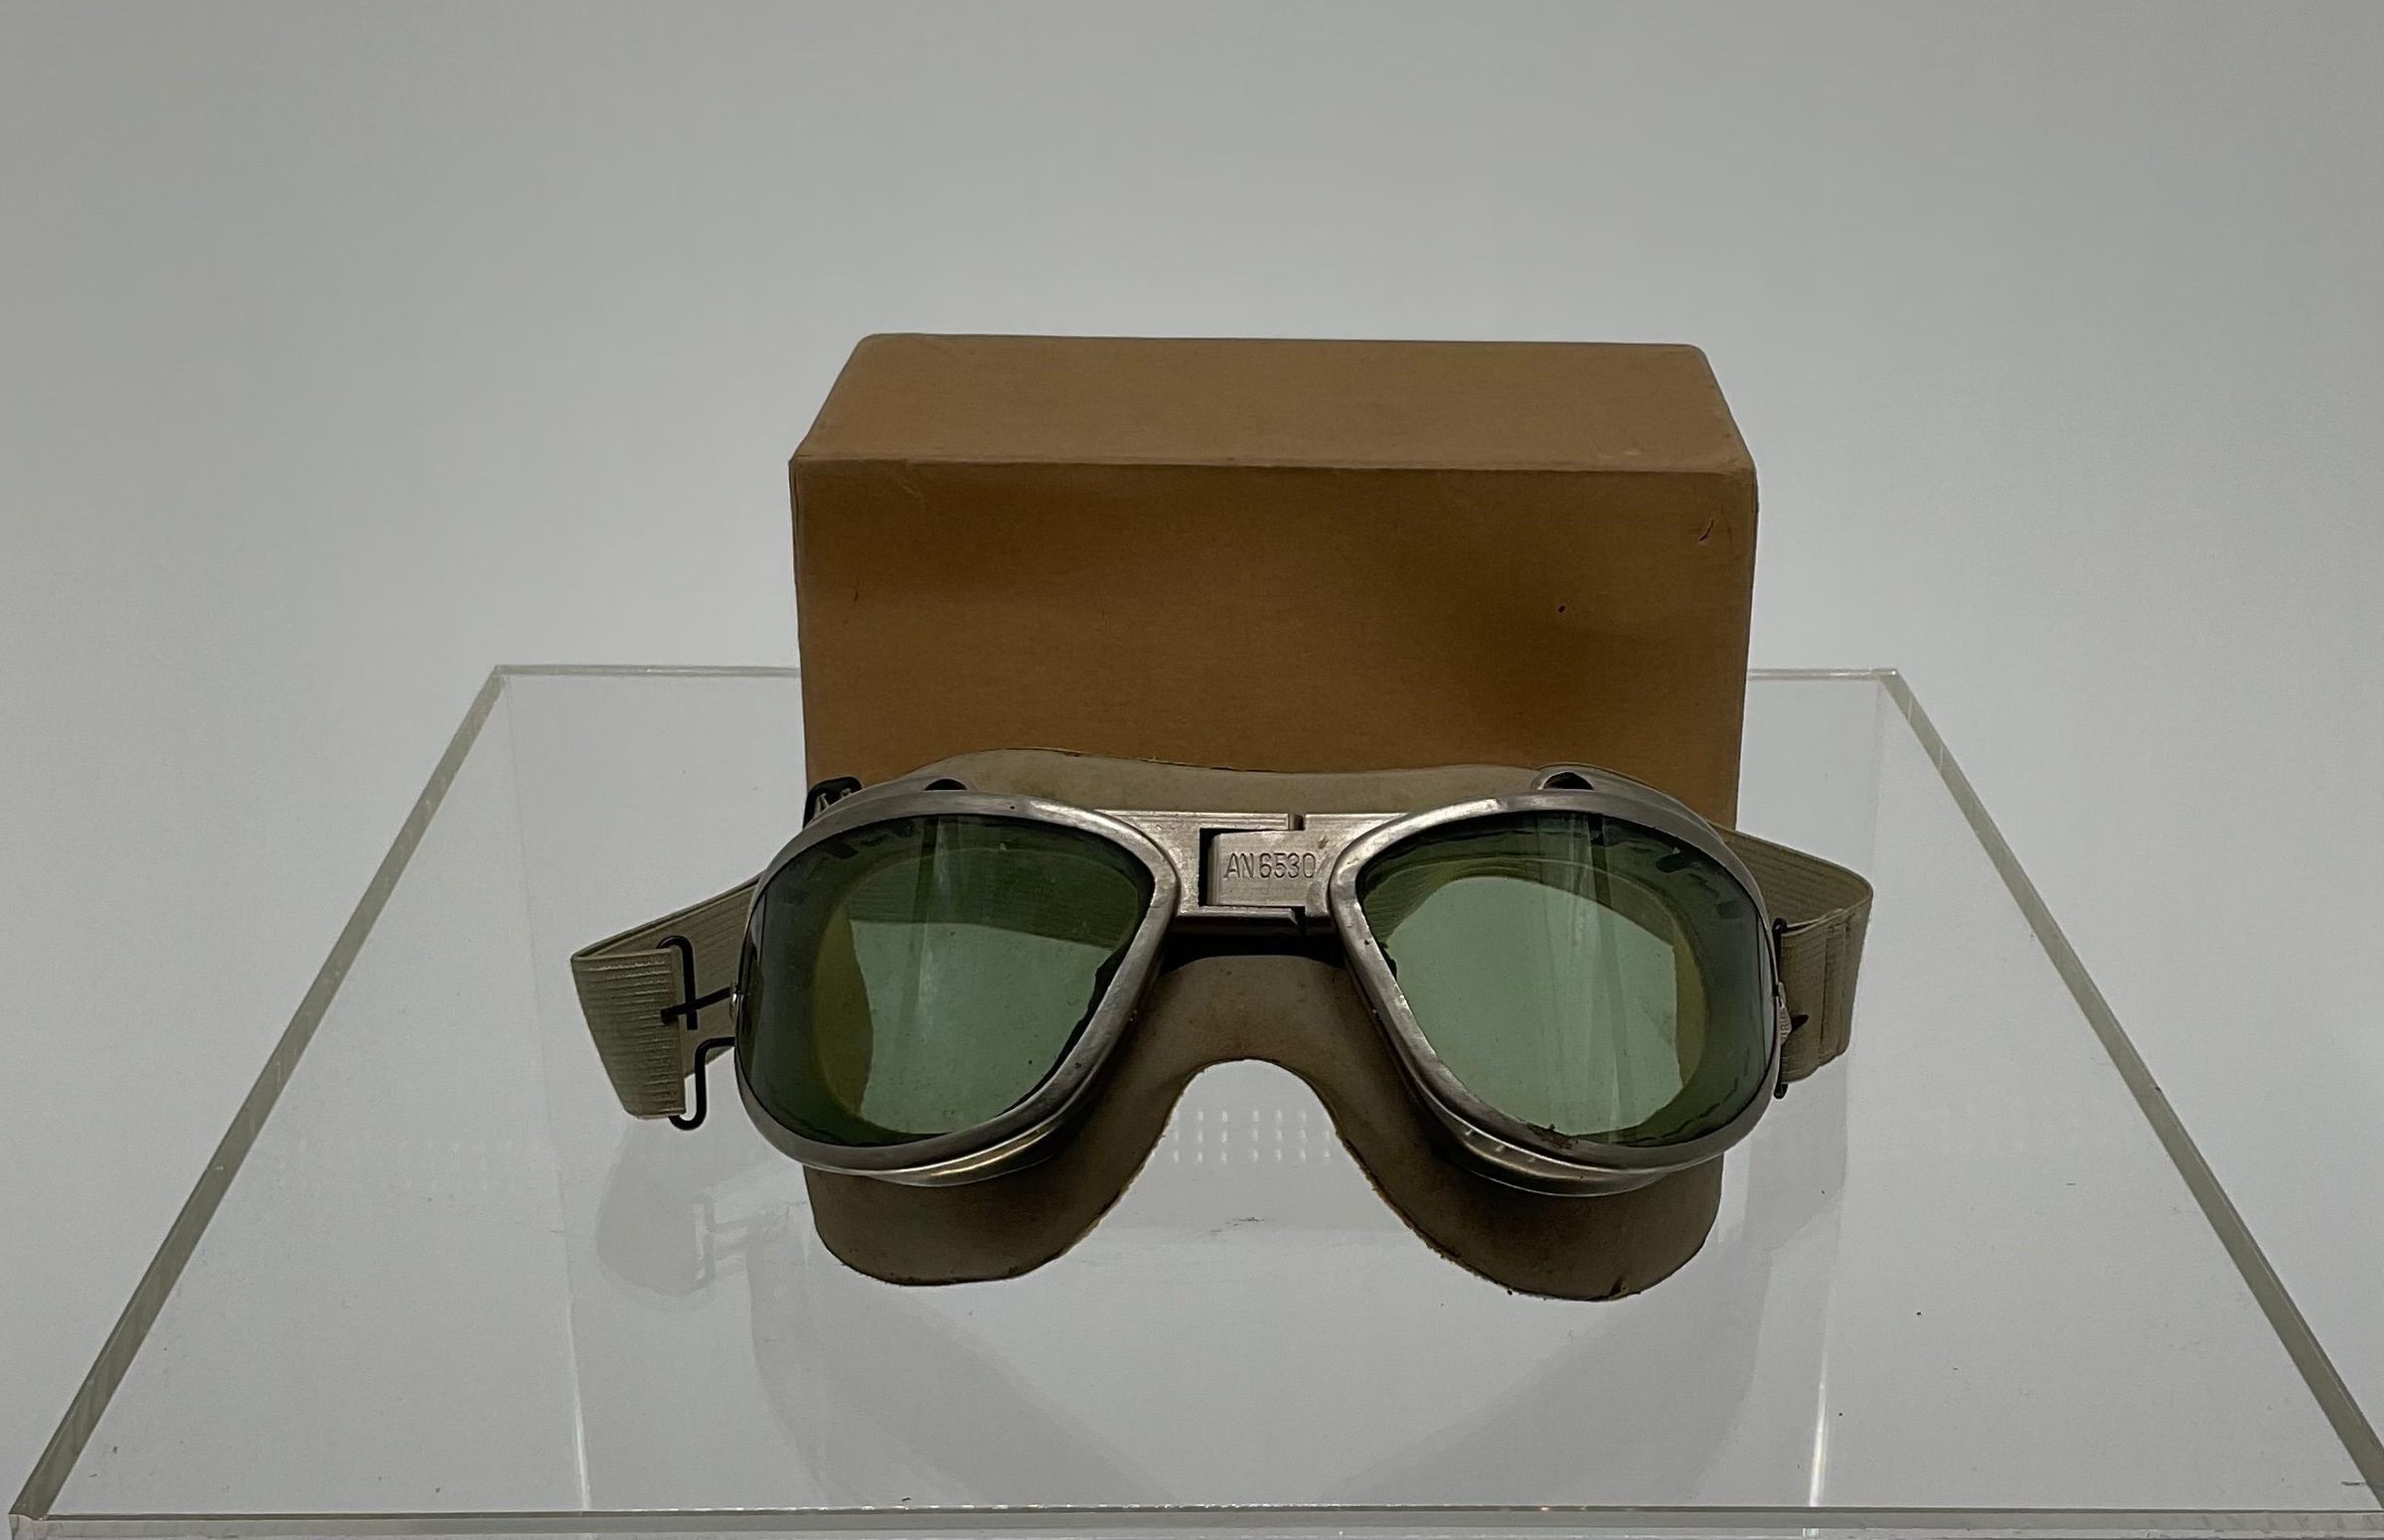 Primary Image of US Naval Aviator Goggles in Box